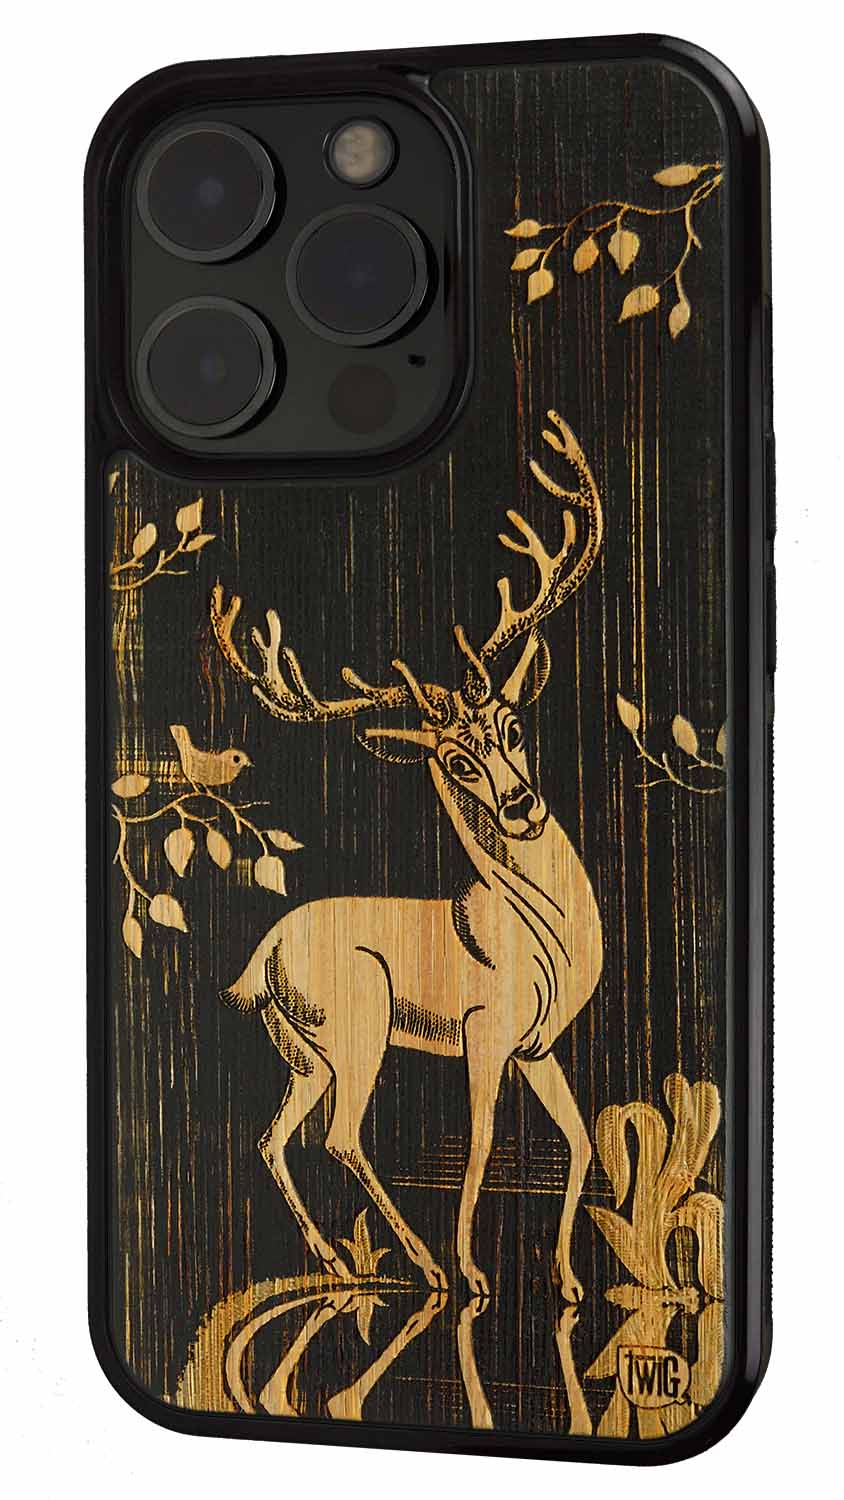 Oh Deer - Bamboo iPhone Case, iPhone Case - Twig Case Co.